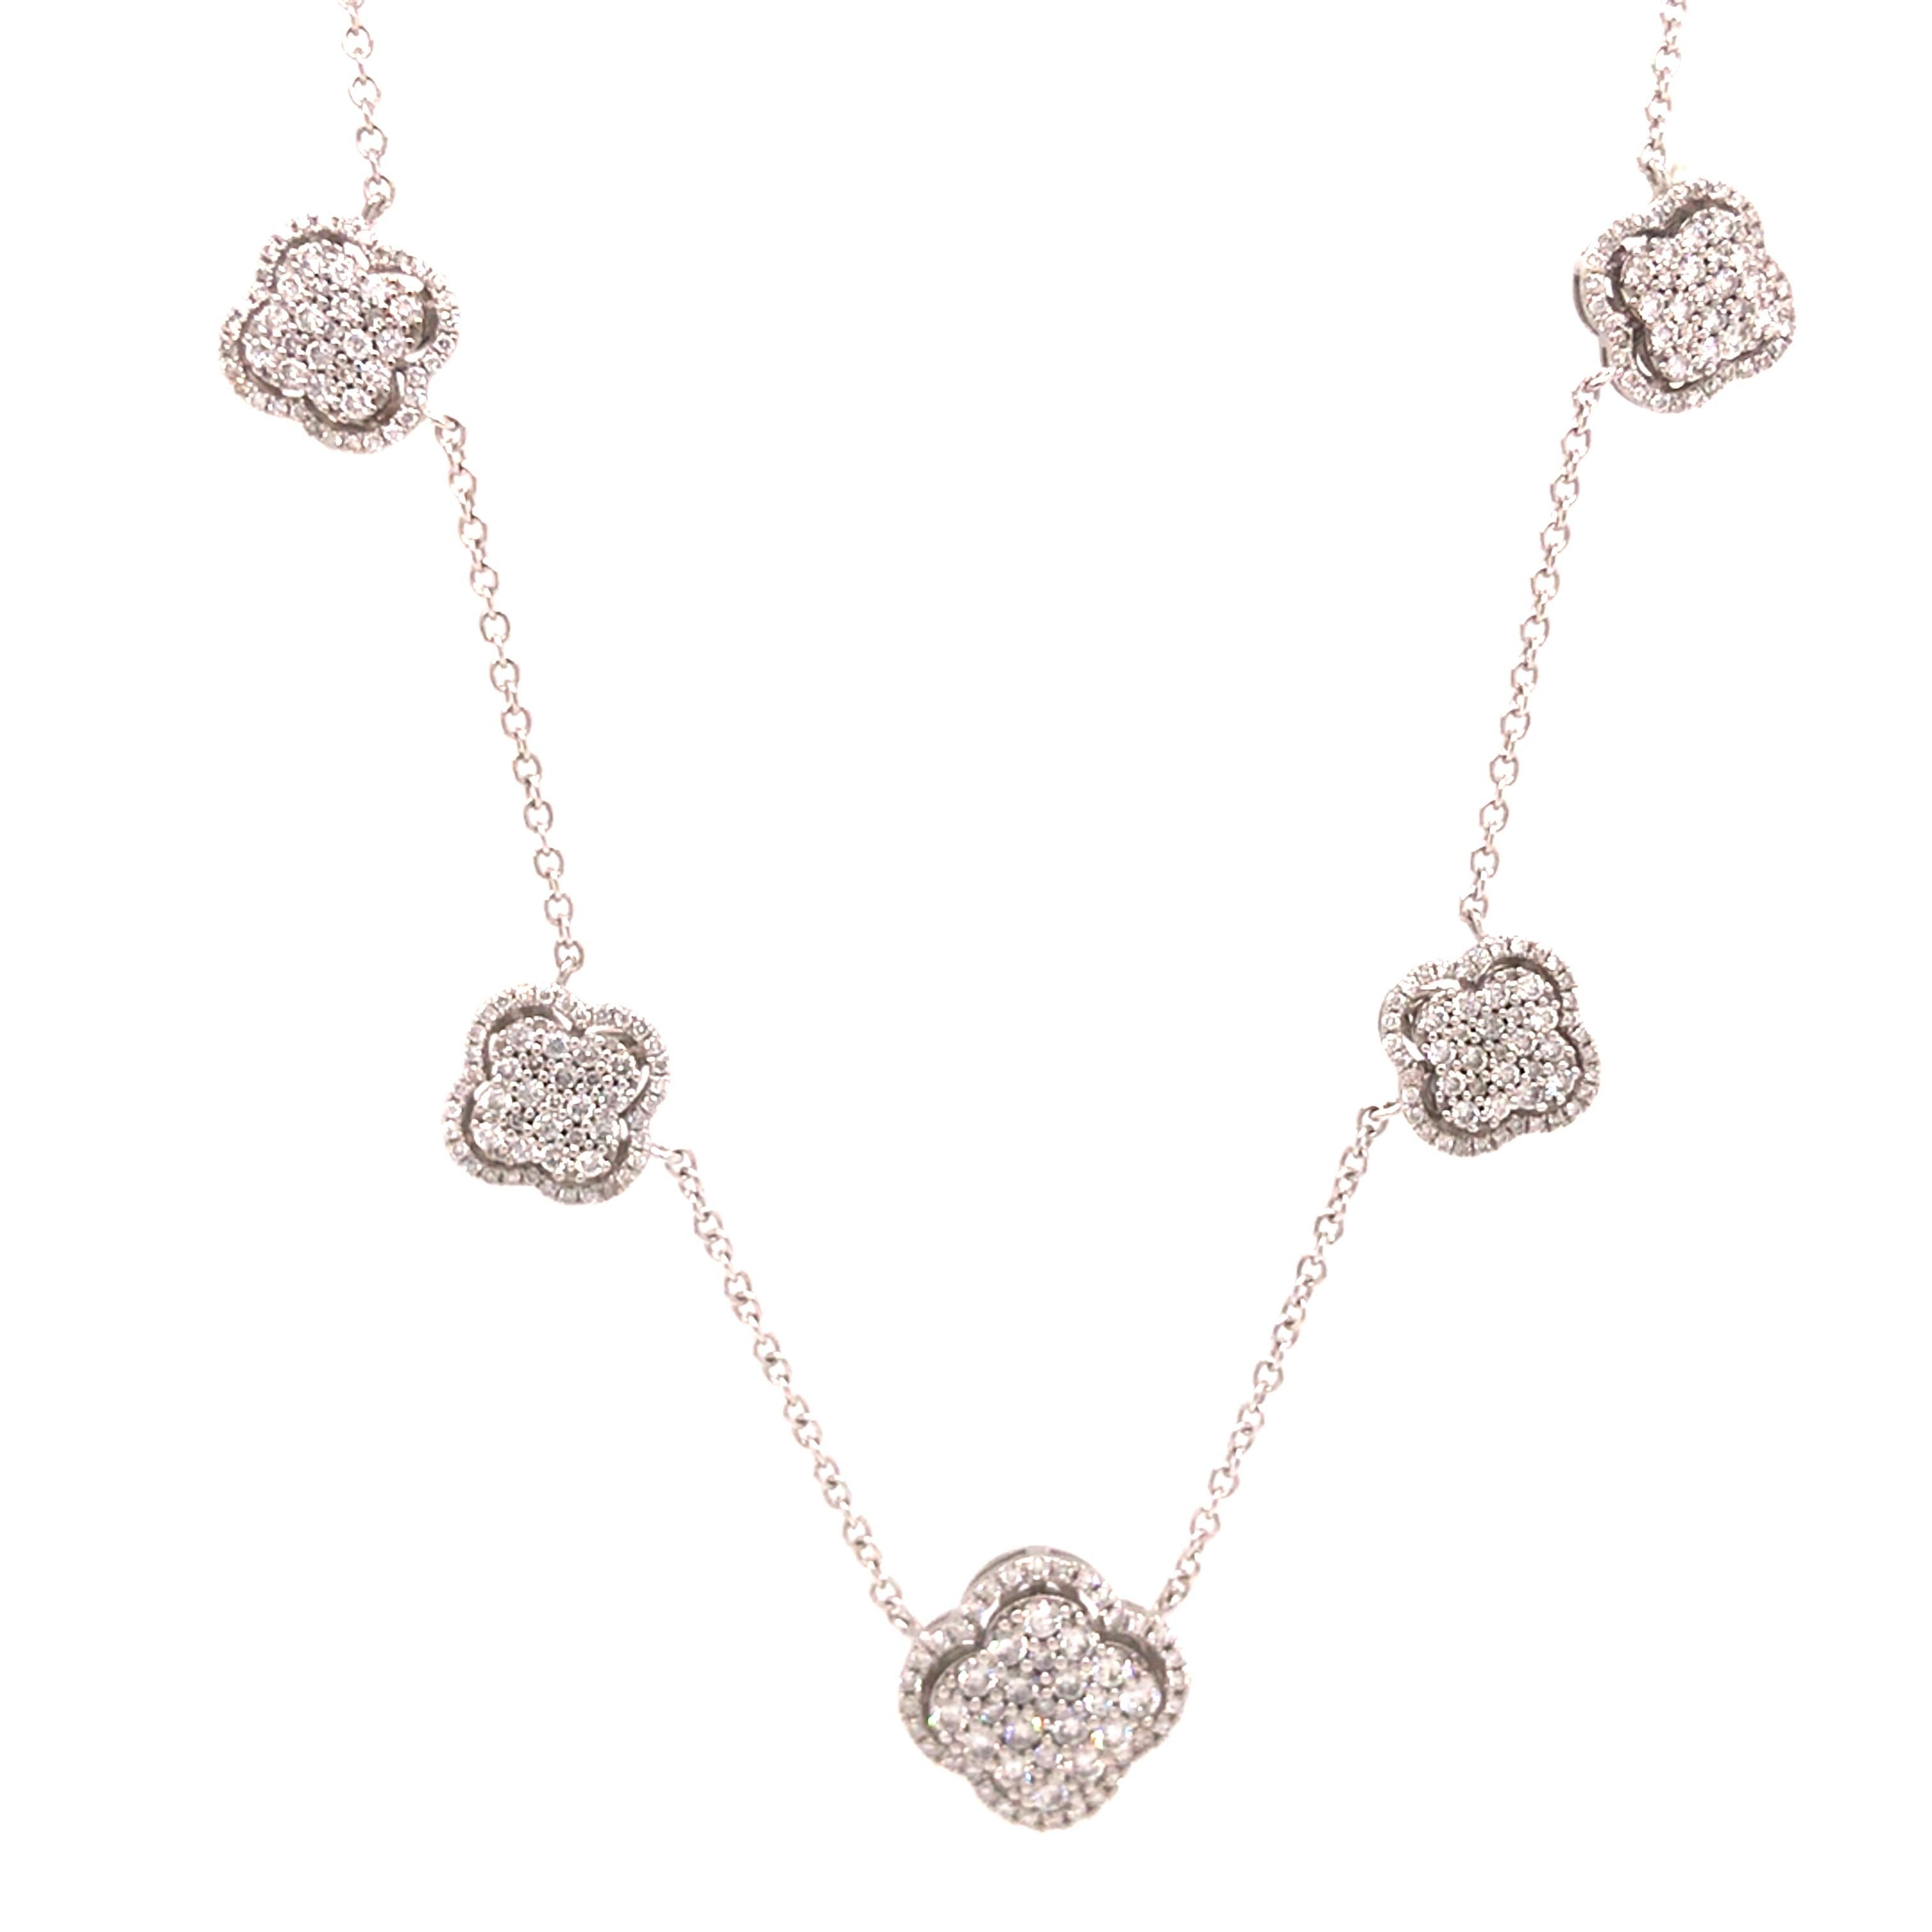 Diamond (5) Cluster Clover Station Necklace in 18K White Gold.  Round Brilliant Cut Diamonds weighing 2.12 carat total weight G-H in color and VS-SI in clarity are expertly set. The Necklace measures 18 inch in length; adjustbale to 16 inch.  The